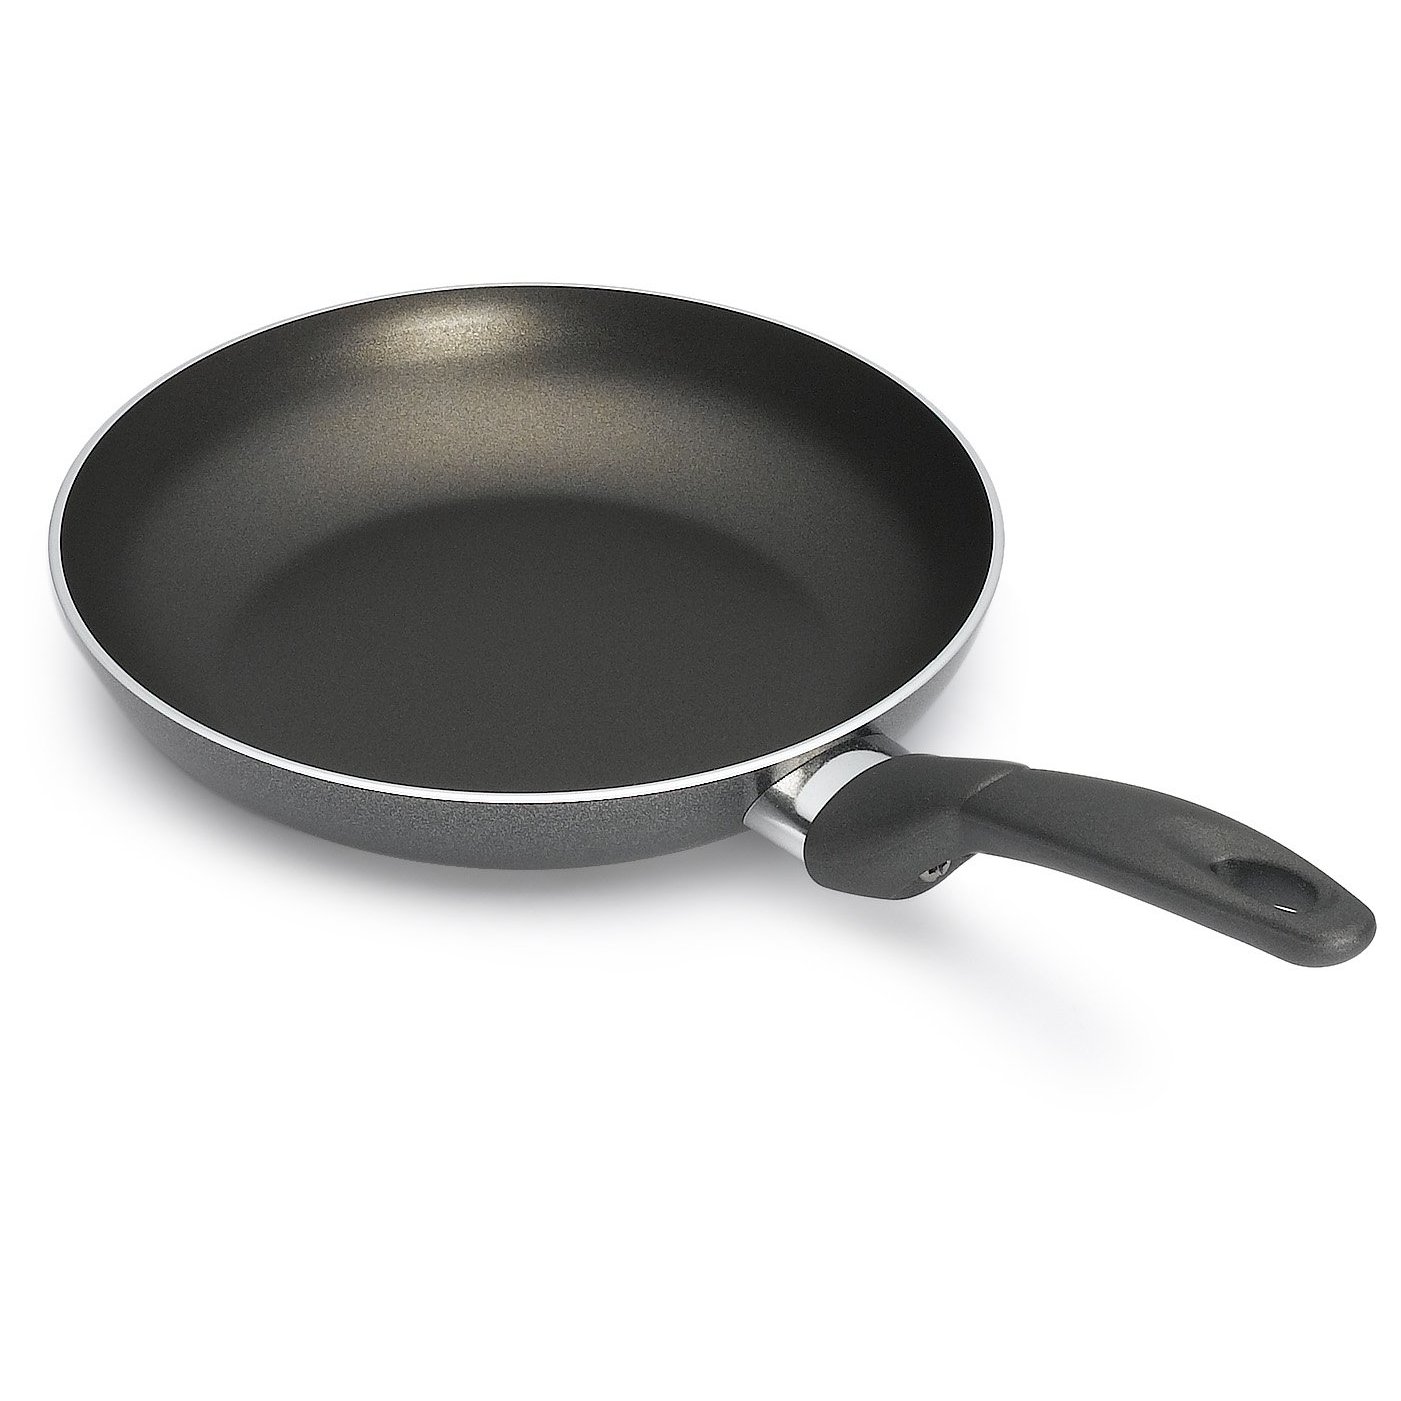 Bialetti Collection 8 Inch Saute Pan